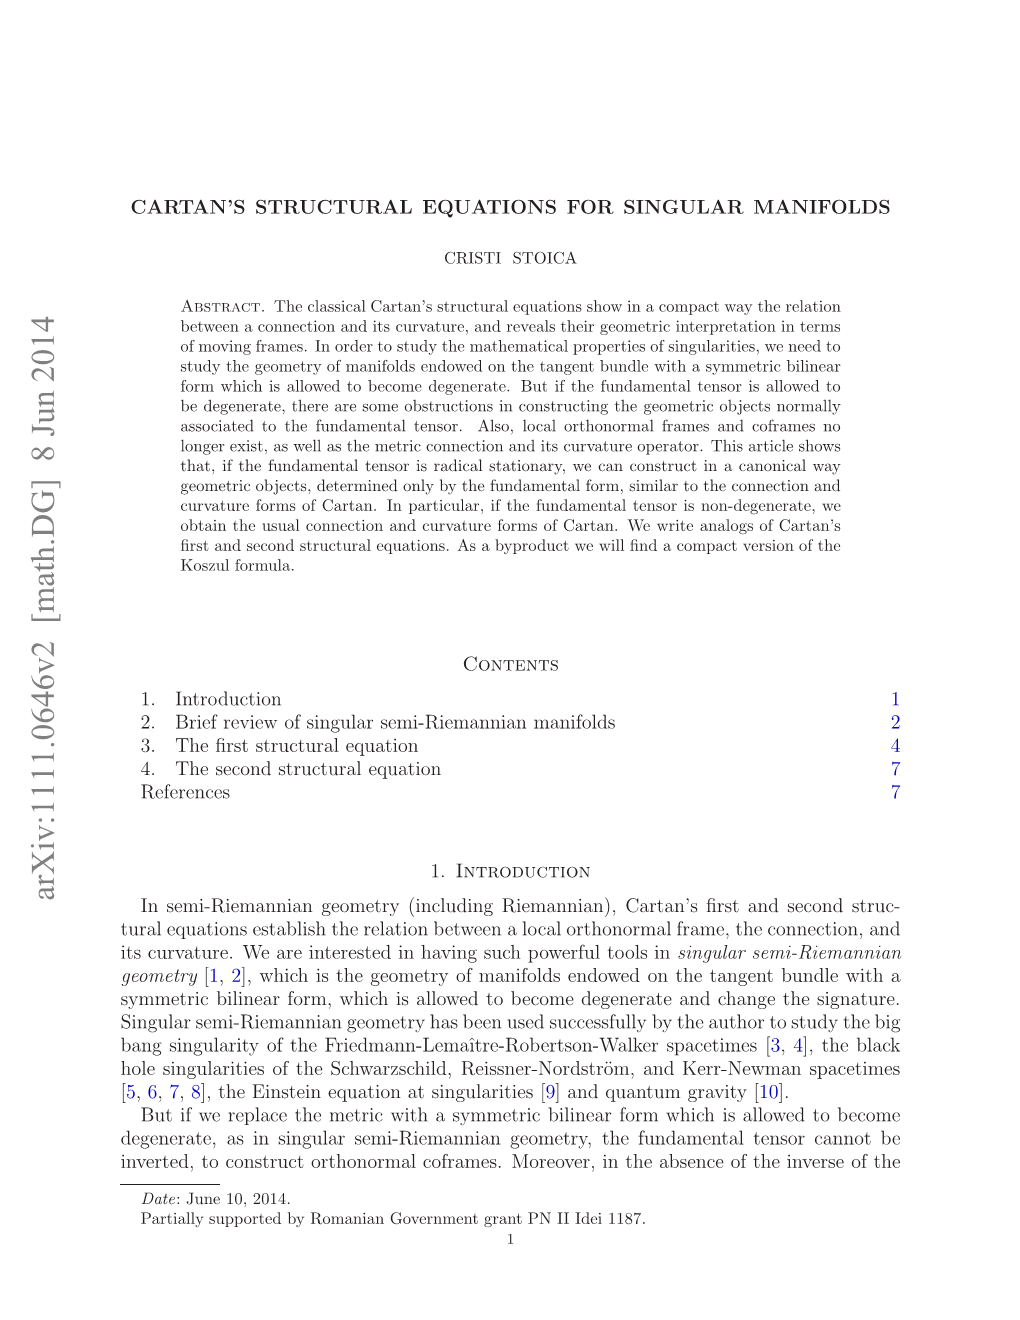 Cartan's Structural Equations for Singular Manifolds